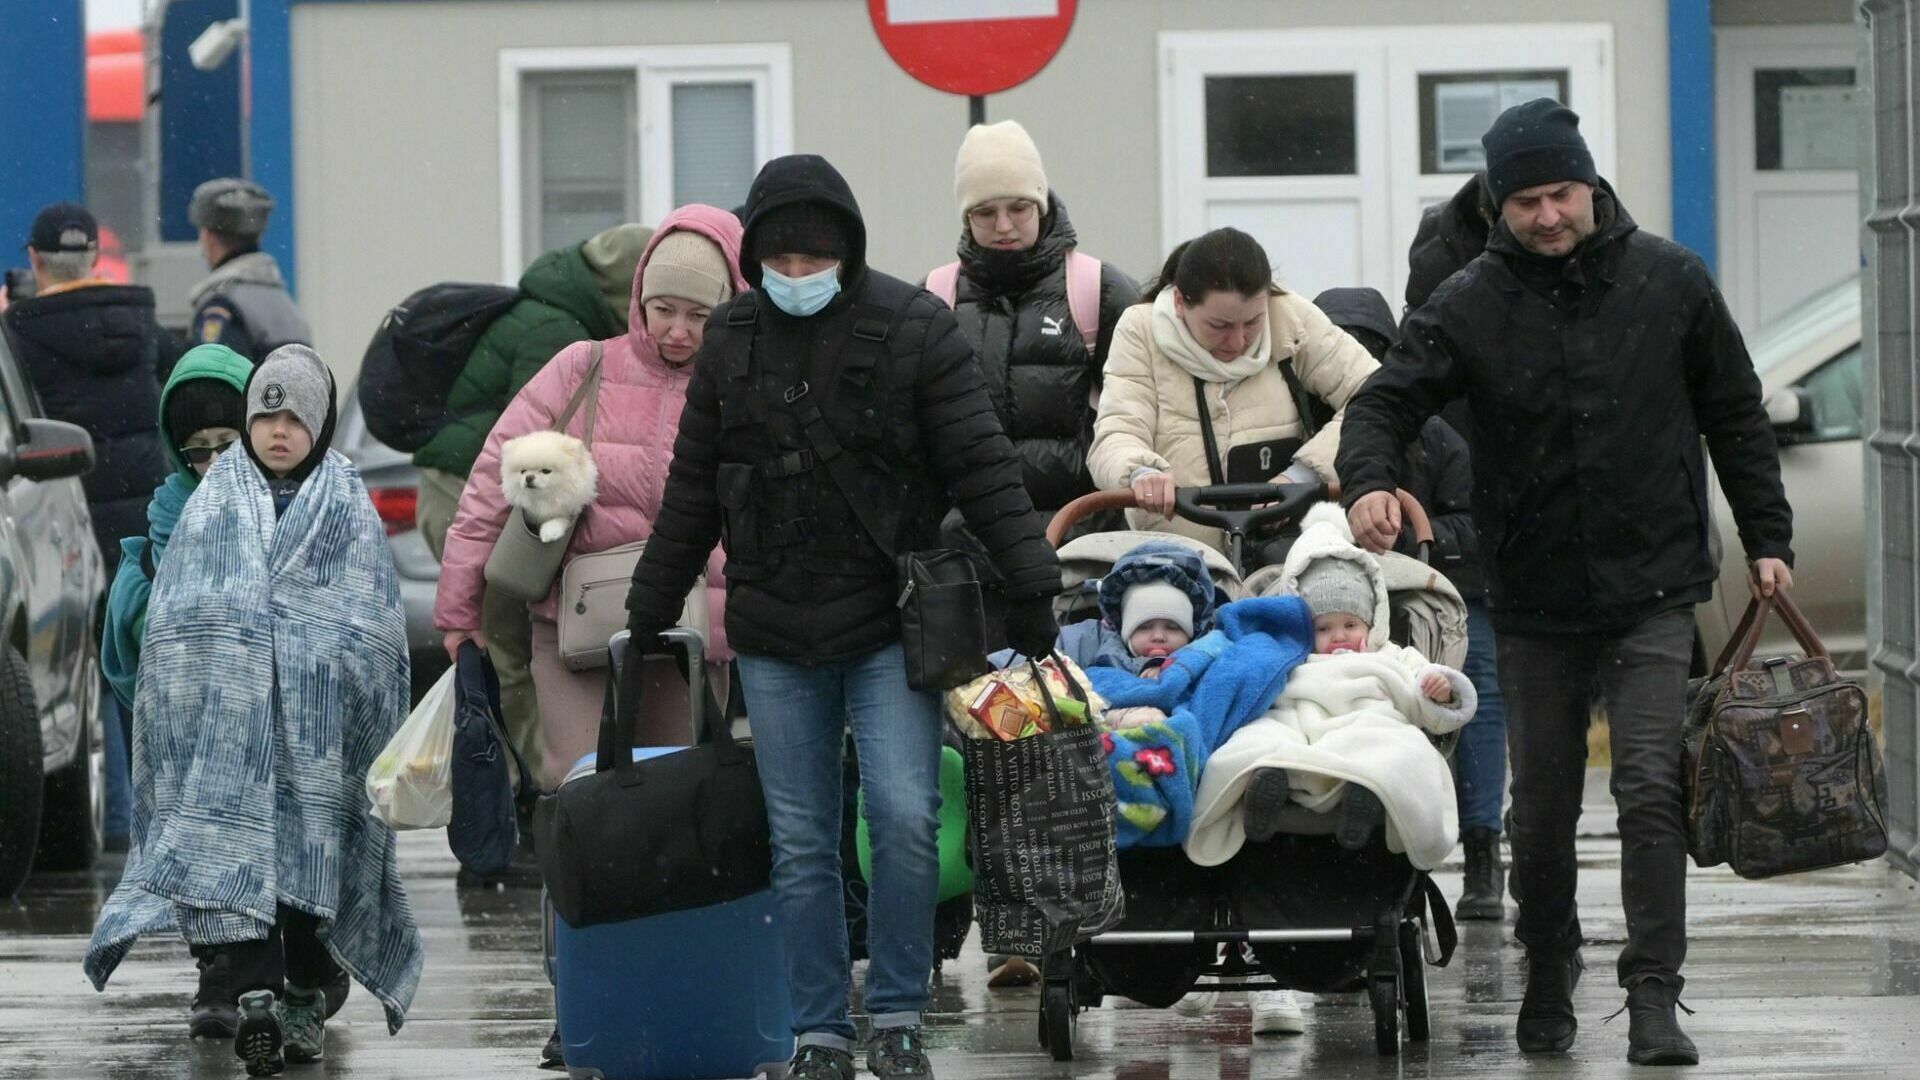 UNHCR: after February 24, about 8 million refugees from Ukraine arrived in Europe